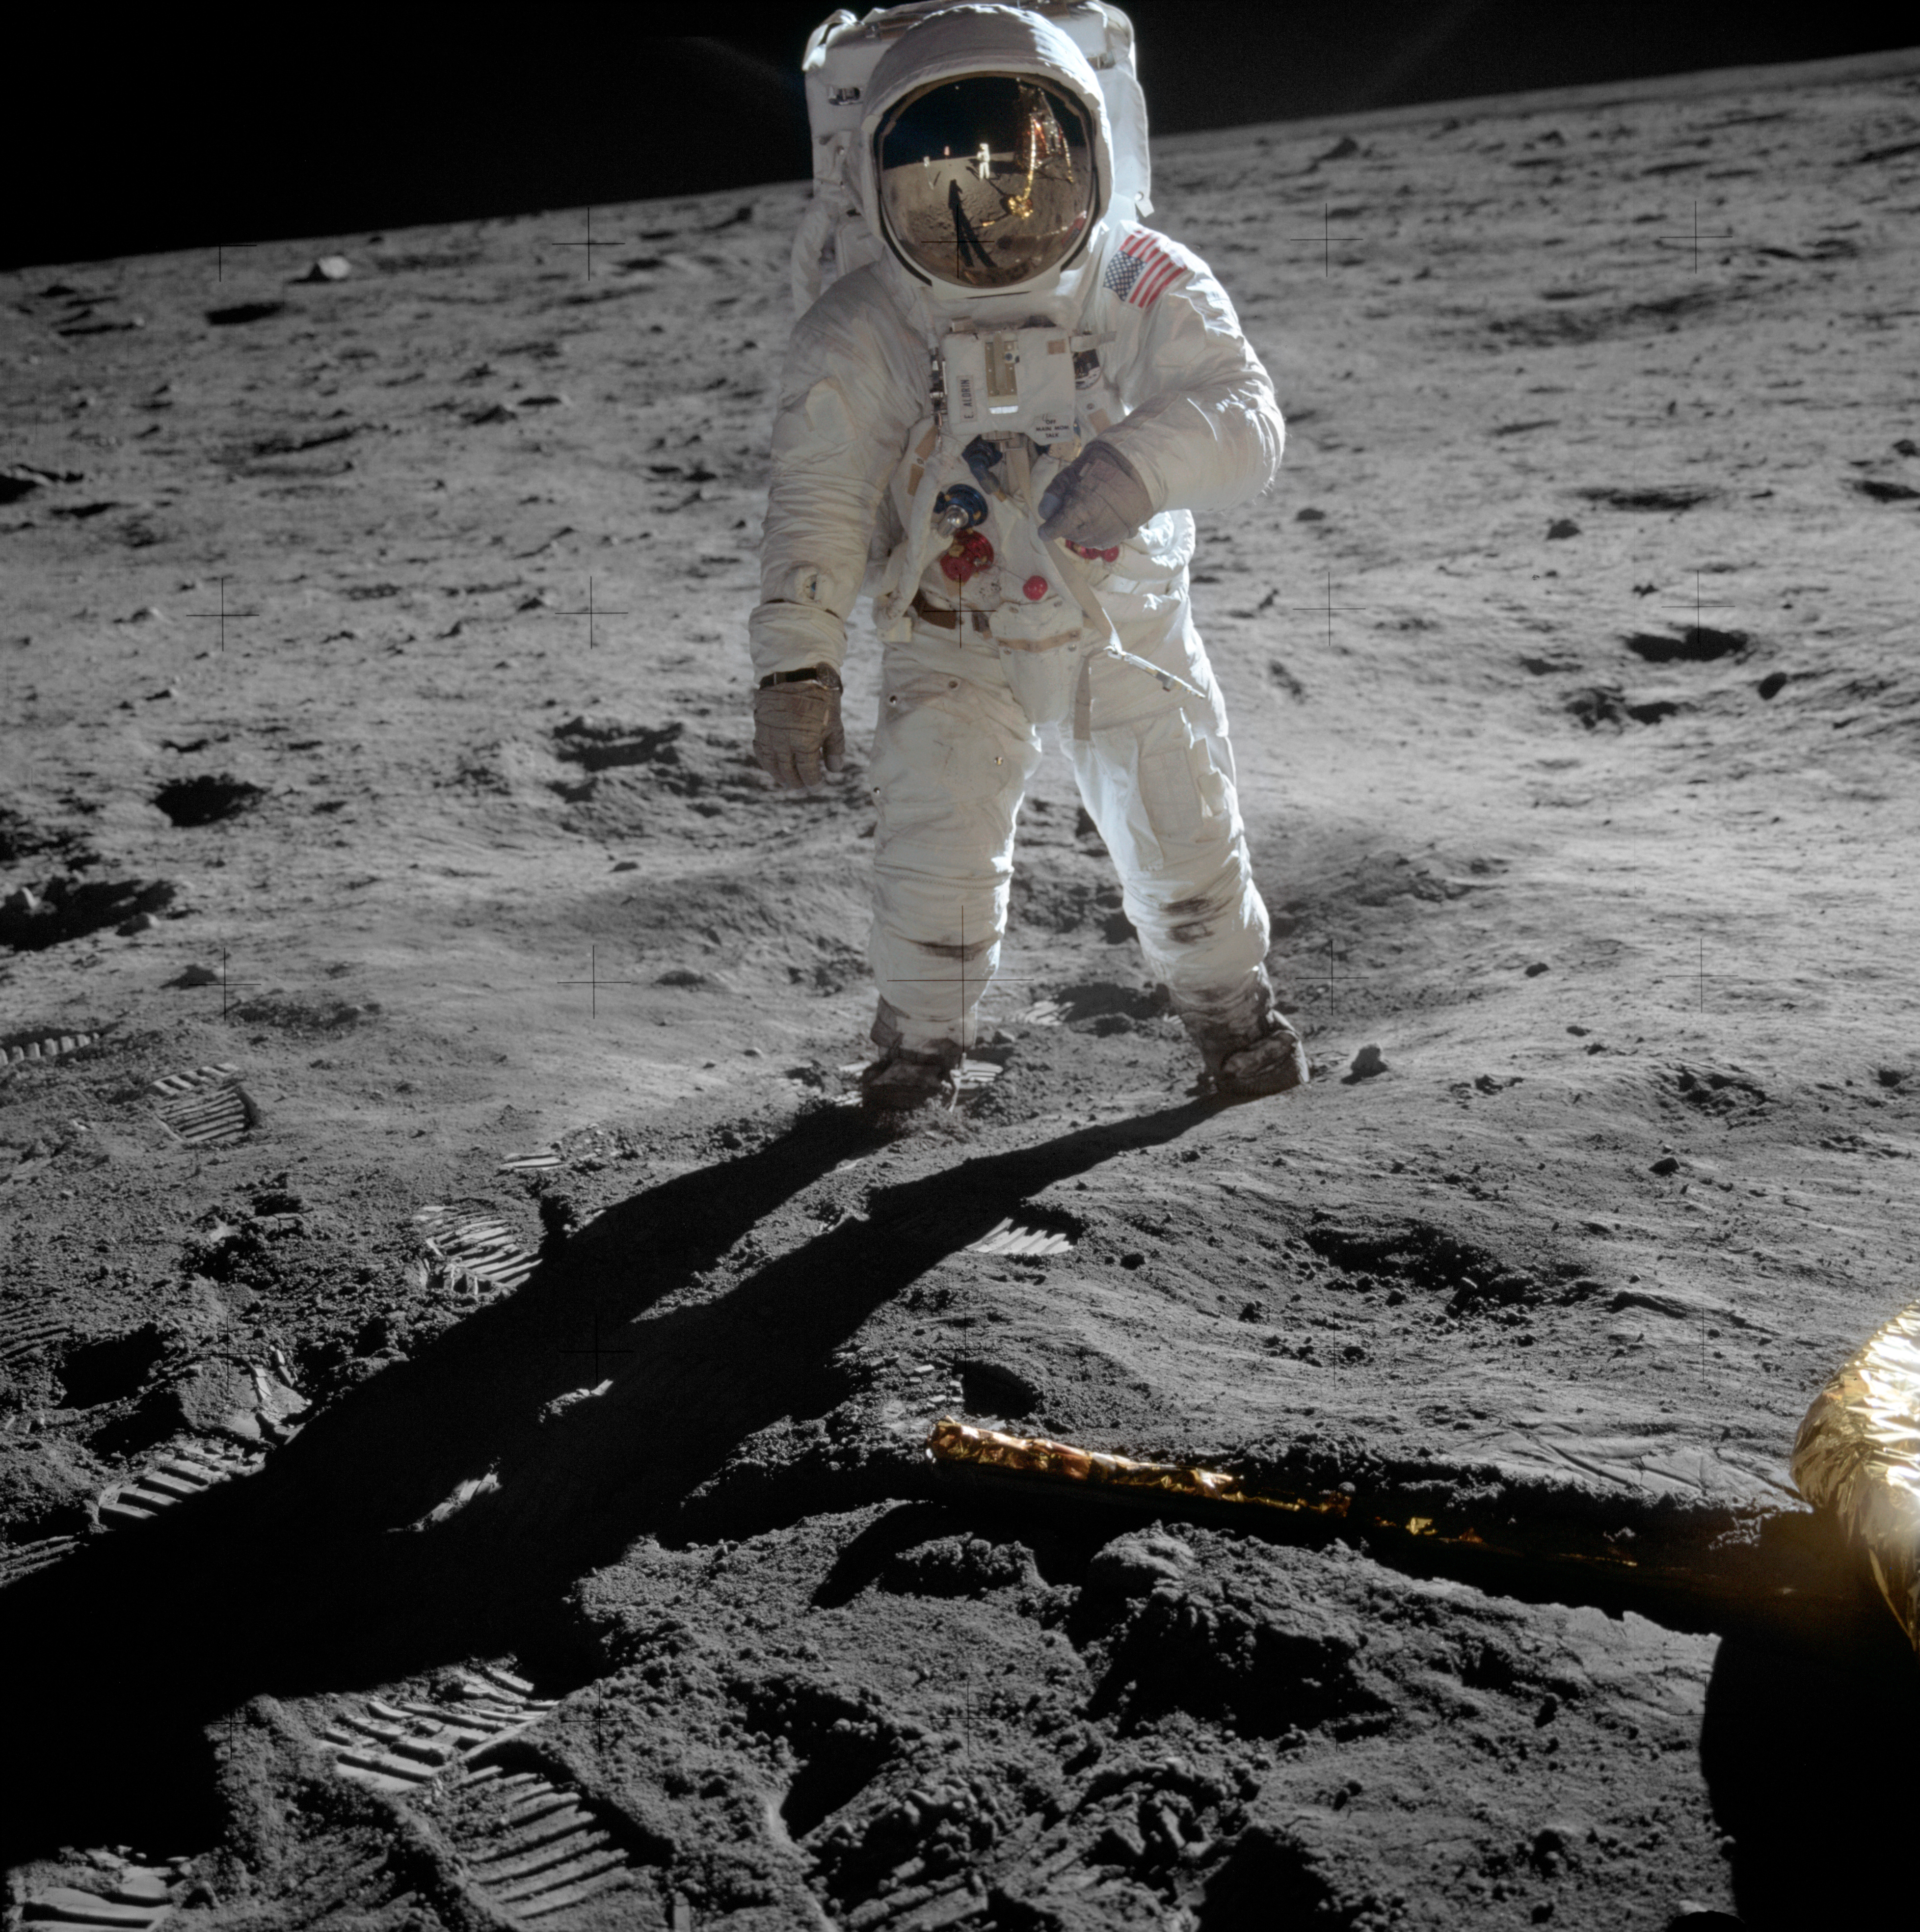 Aldrin stands on the Moon